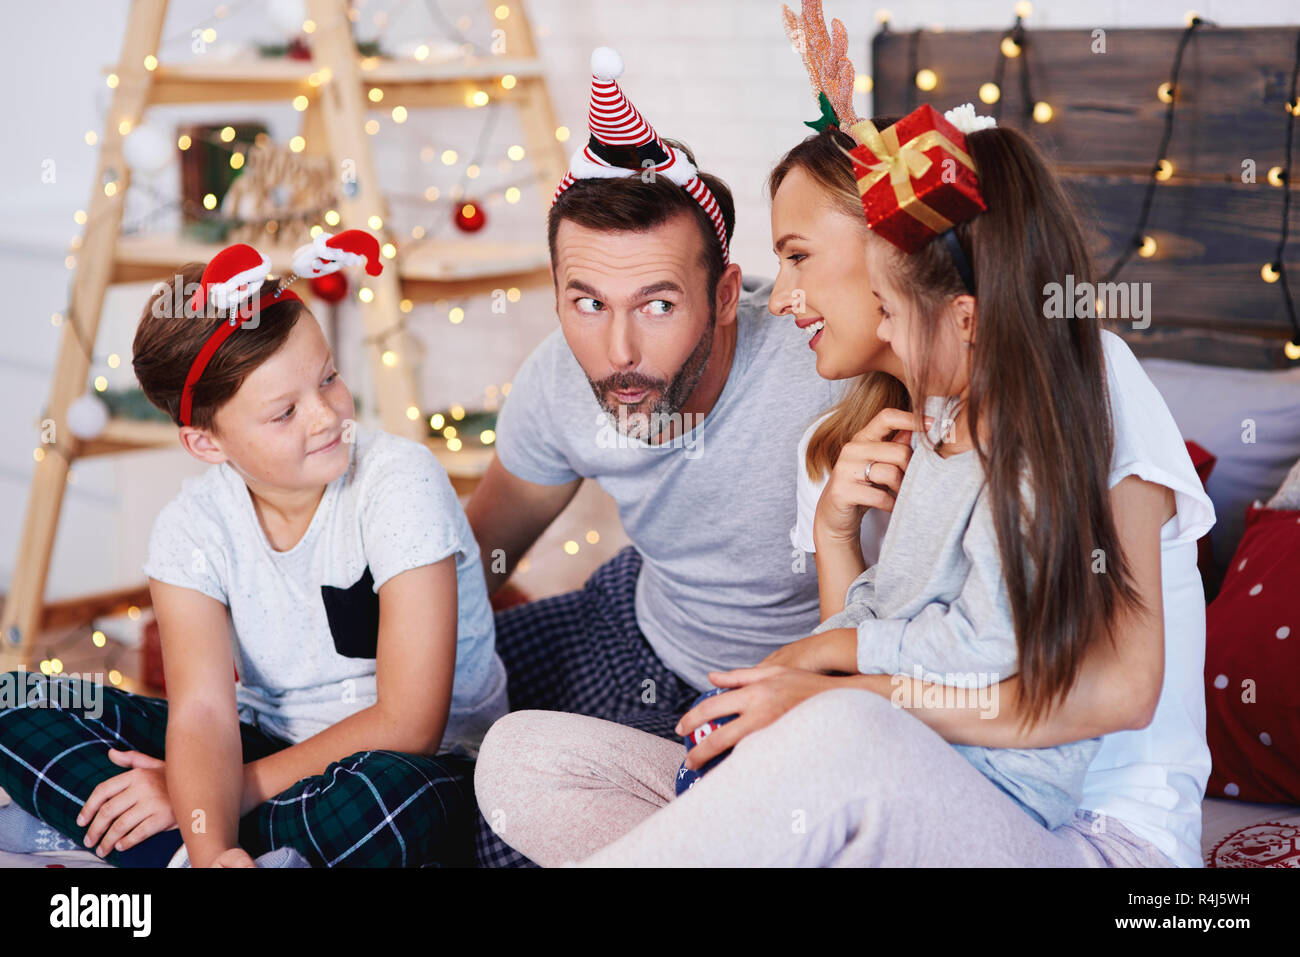 Family celebrating Christmas together at home Stock Photo